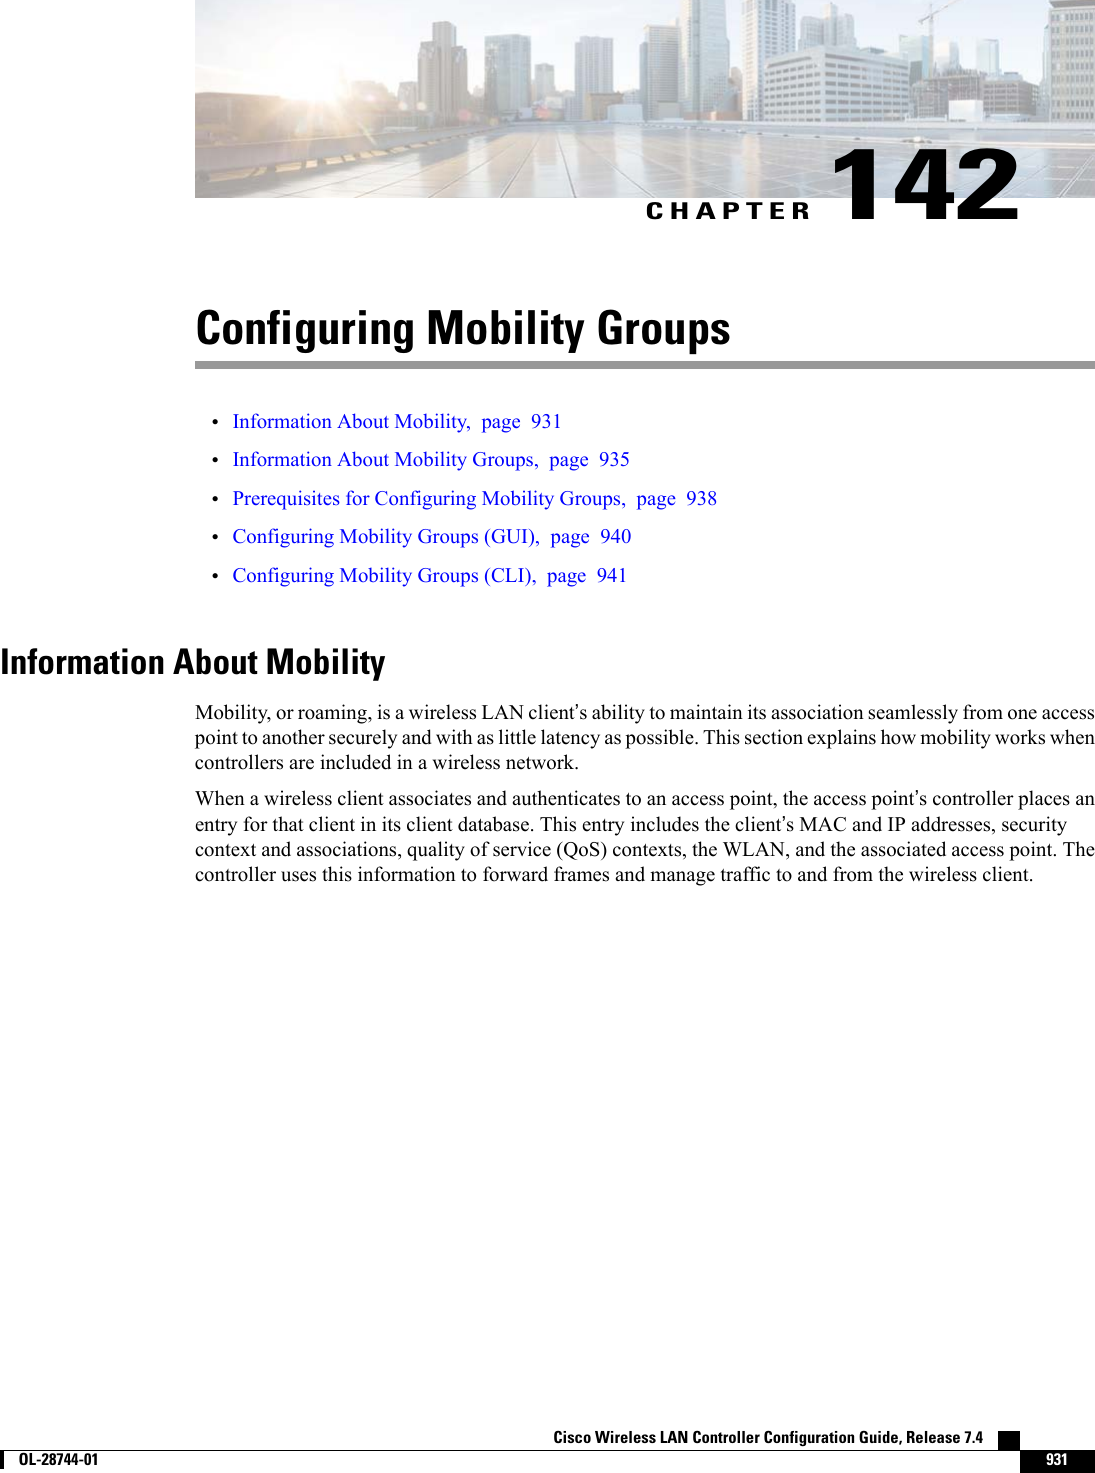 CHAPTER 142Configuring Mobility Groups•Information About Mobility, page 931•Information About Mobility Groups, page 935•Prerequisites for Configuring Mobility Groups, page 938•Configuring Mobility Groups (GUI), page 940•Configuring Mobility Groups (CLI), page 941Information About MobilityMobility, or roaming, is a wireless LAN client’s ability to maintain its association seamlessly from one accesspoint to another securely and with as little latency as possible. This section explains how mobility works whencontrollers are included in a wireless network.When a wireless client associates and authenticates to an access point, the access point’s controller places anentry for that client in its client database. This entry includes the client’s MAC and IP addresses, securitycontext and associations, quality of service (QoS) contexts, the WLAN, and the associated access point. Thecontroller uses this information to forward frames and manage traffic to and from the wireless client.Cisco Wireless LAN Controller Configuration Guide, Release 7.4        OL-28744-01 931